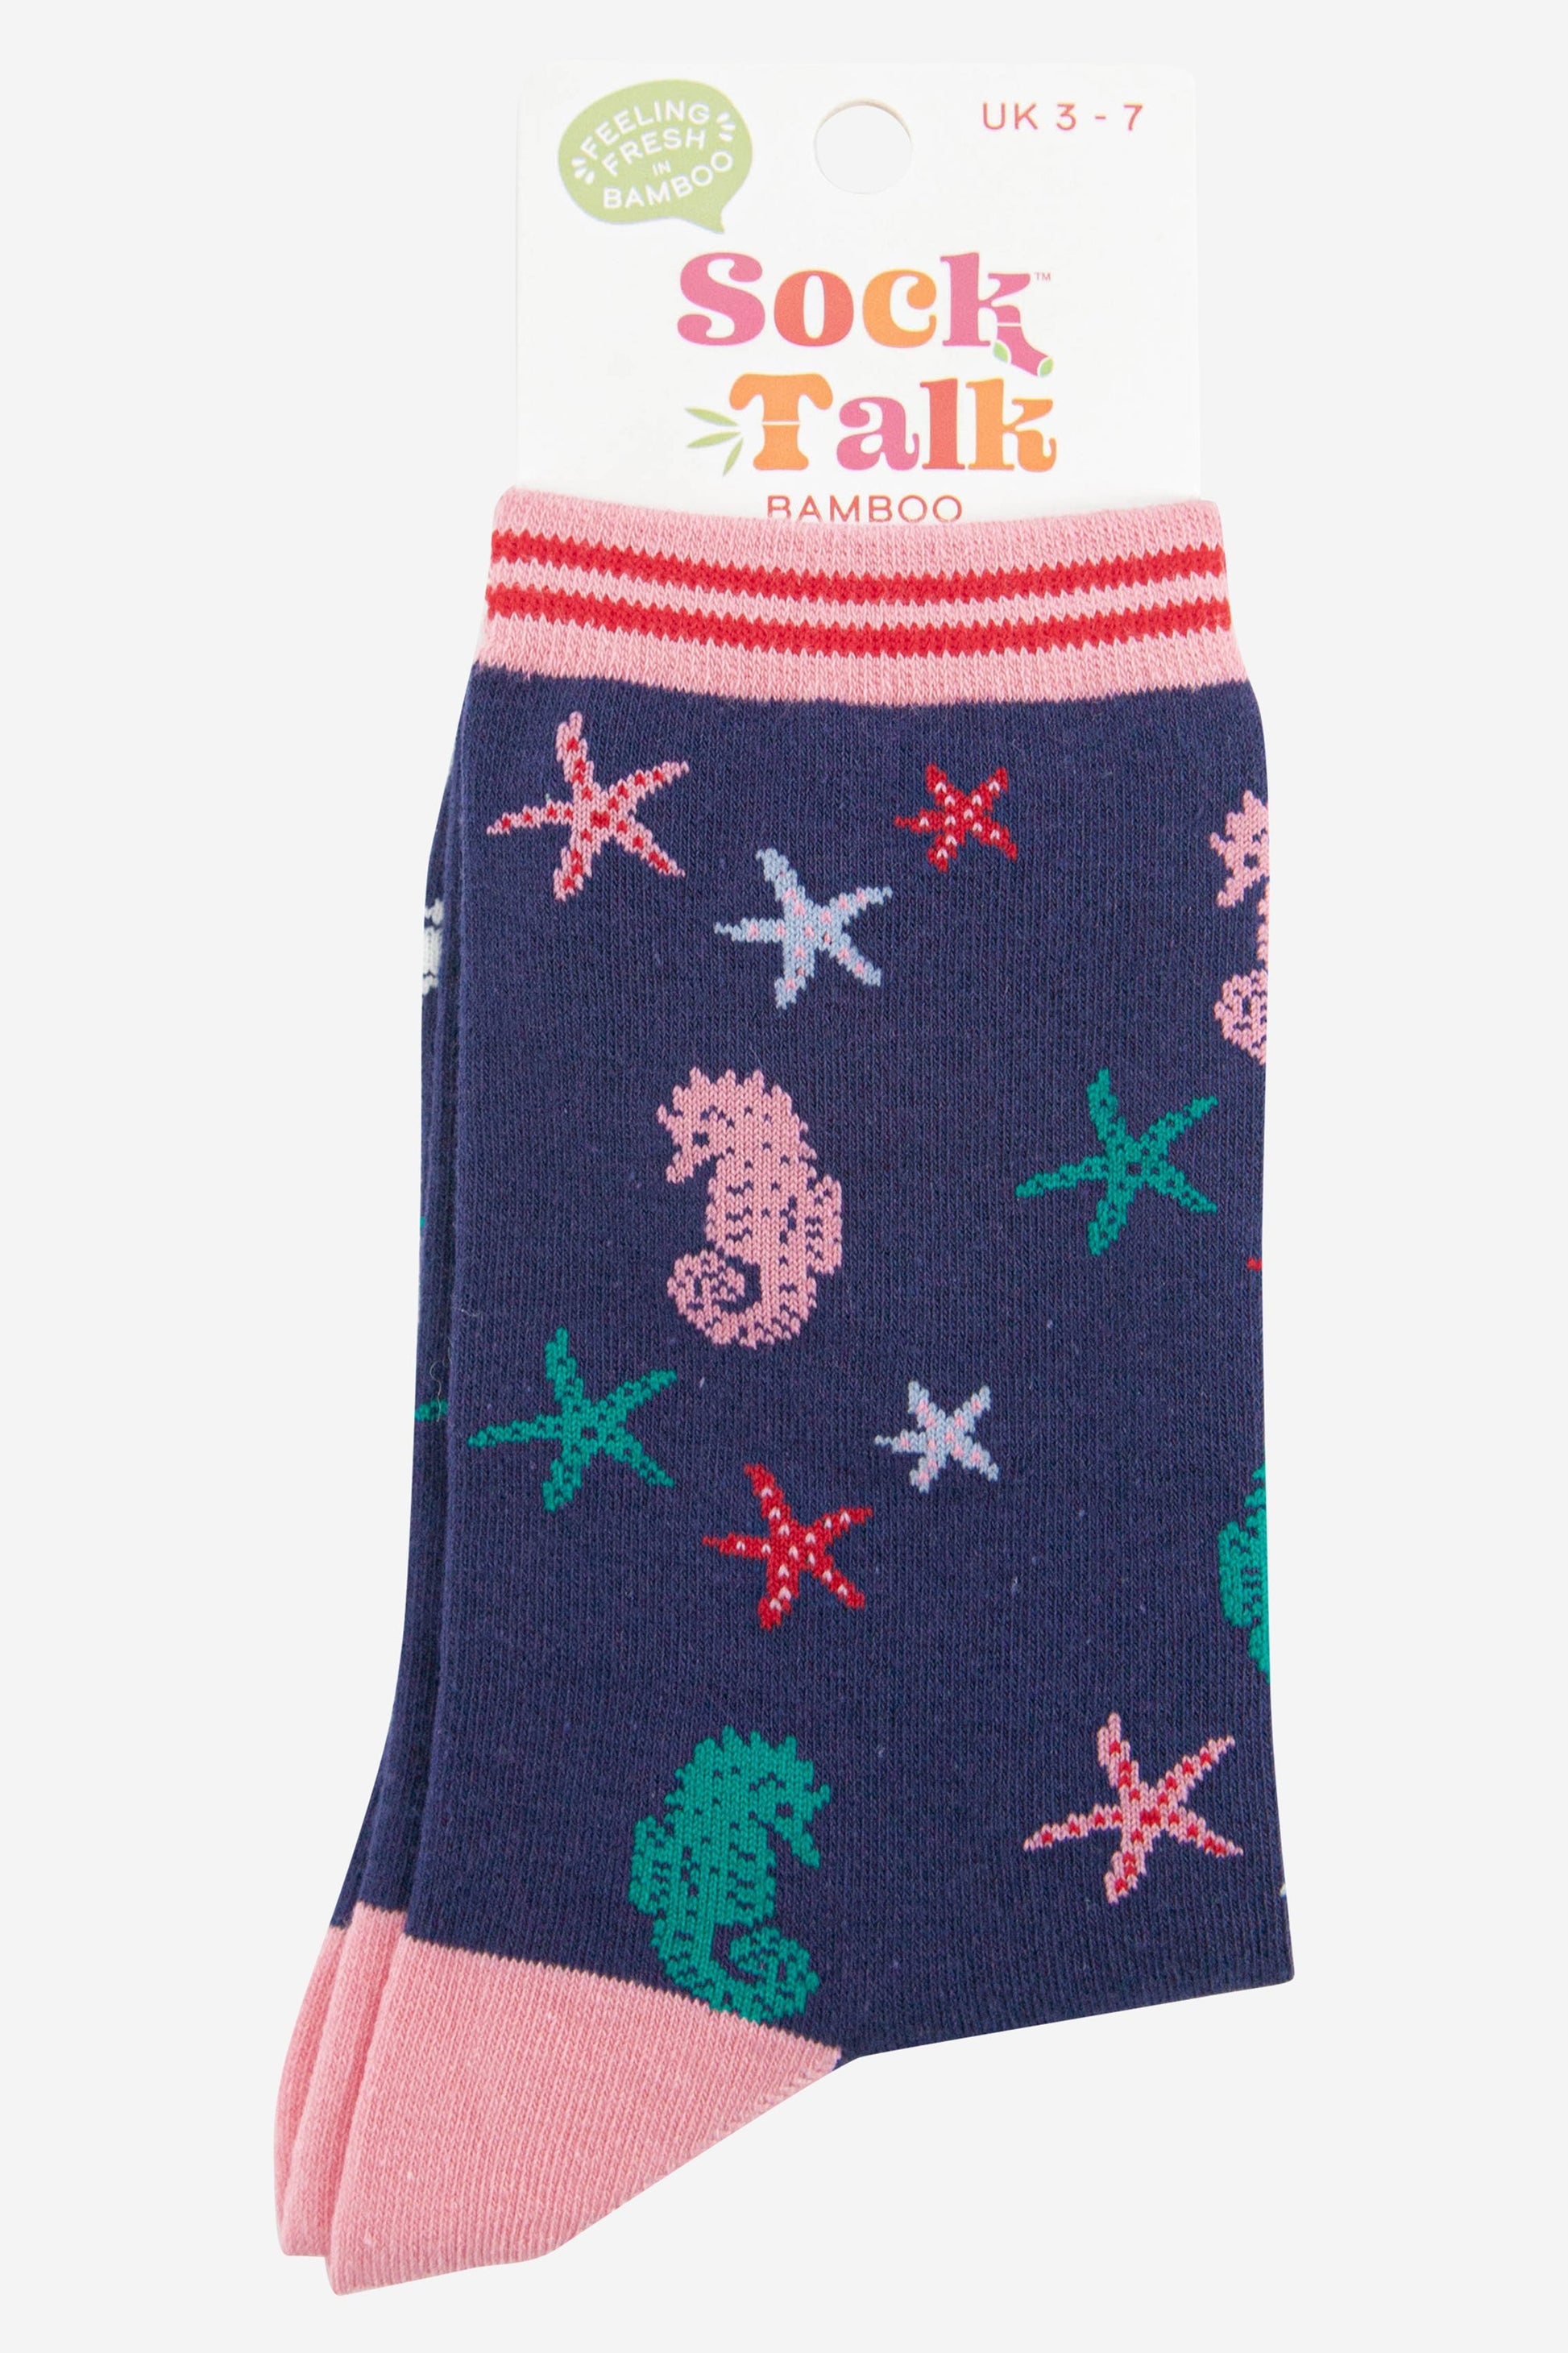 womens seahorse and star print ankle socks uk size 3-7